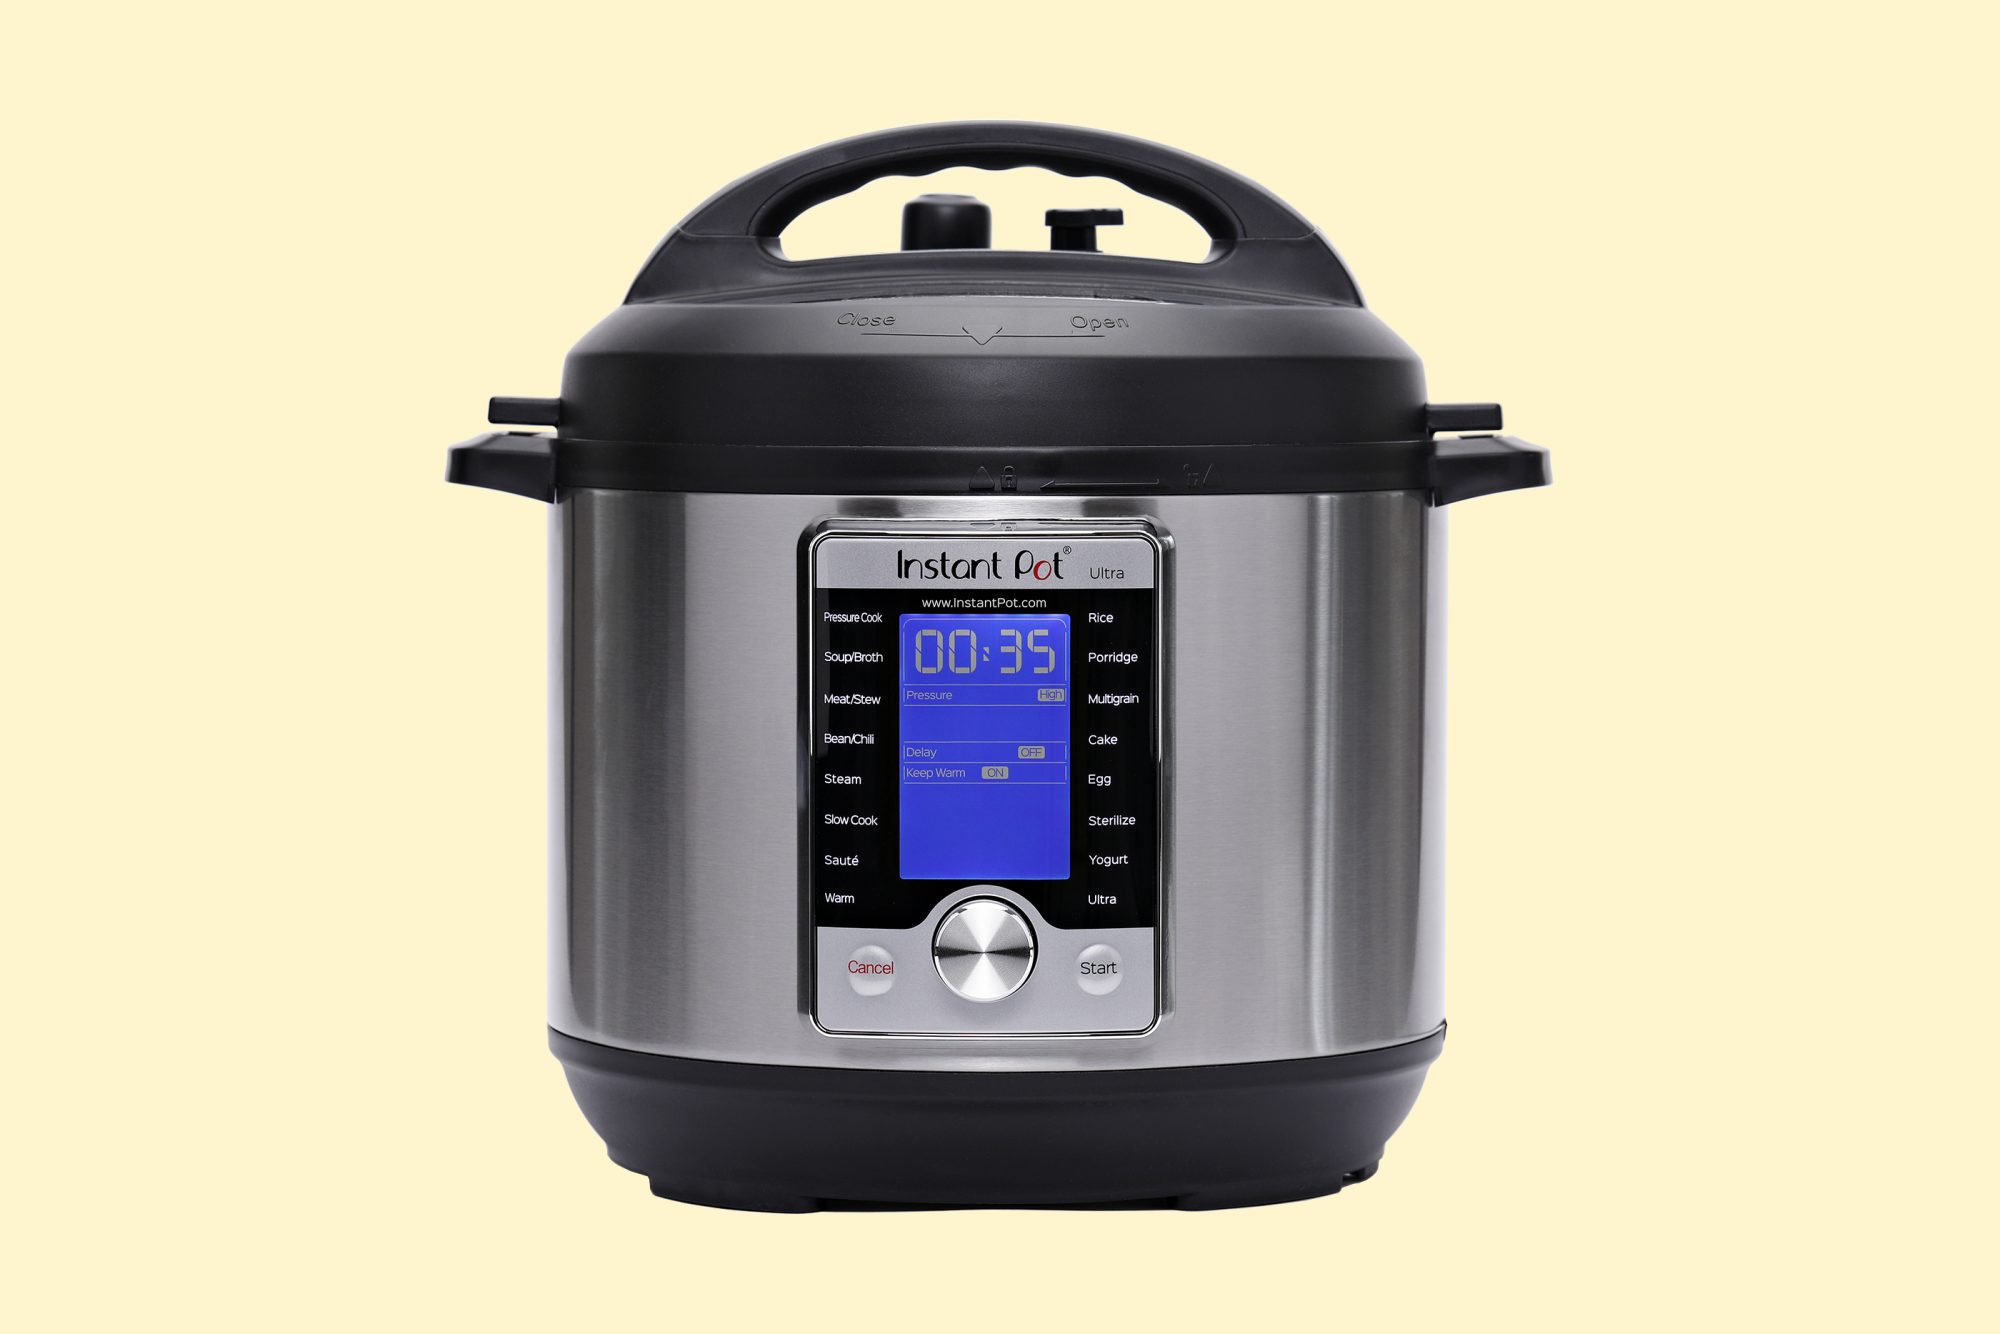 What to Do If You Damage Your Instant Pot